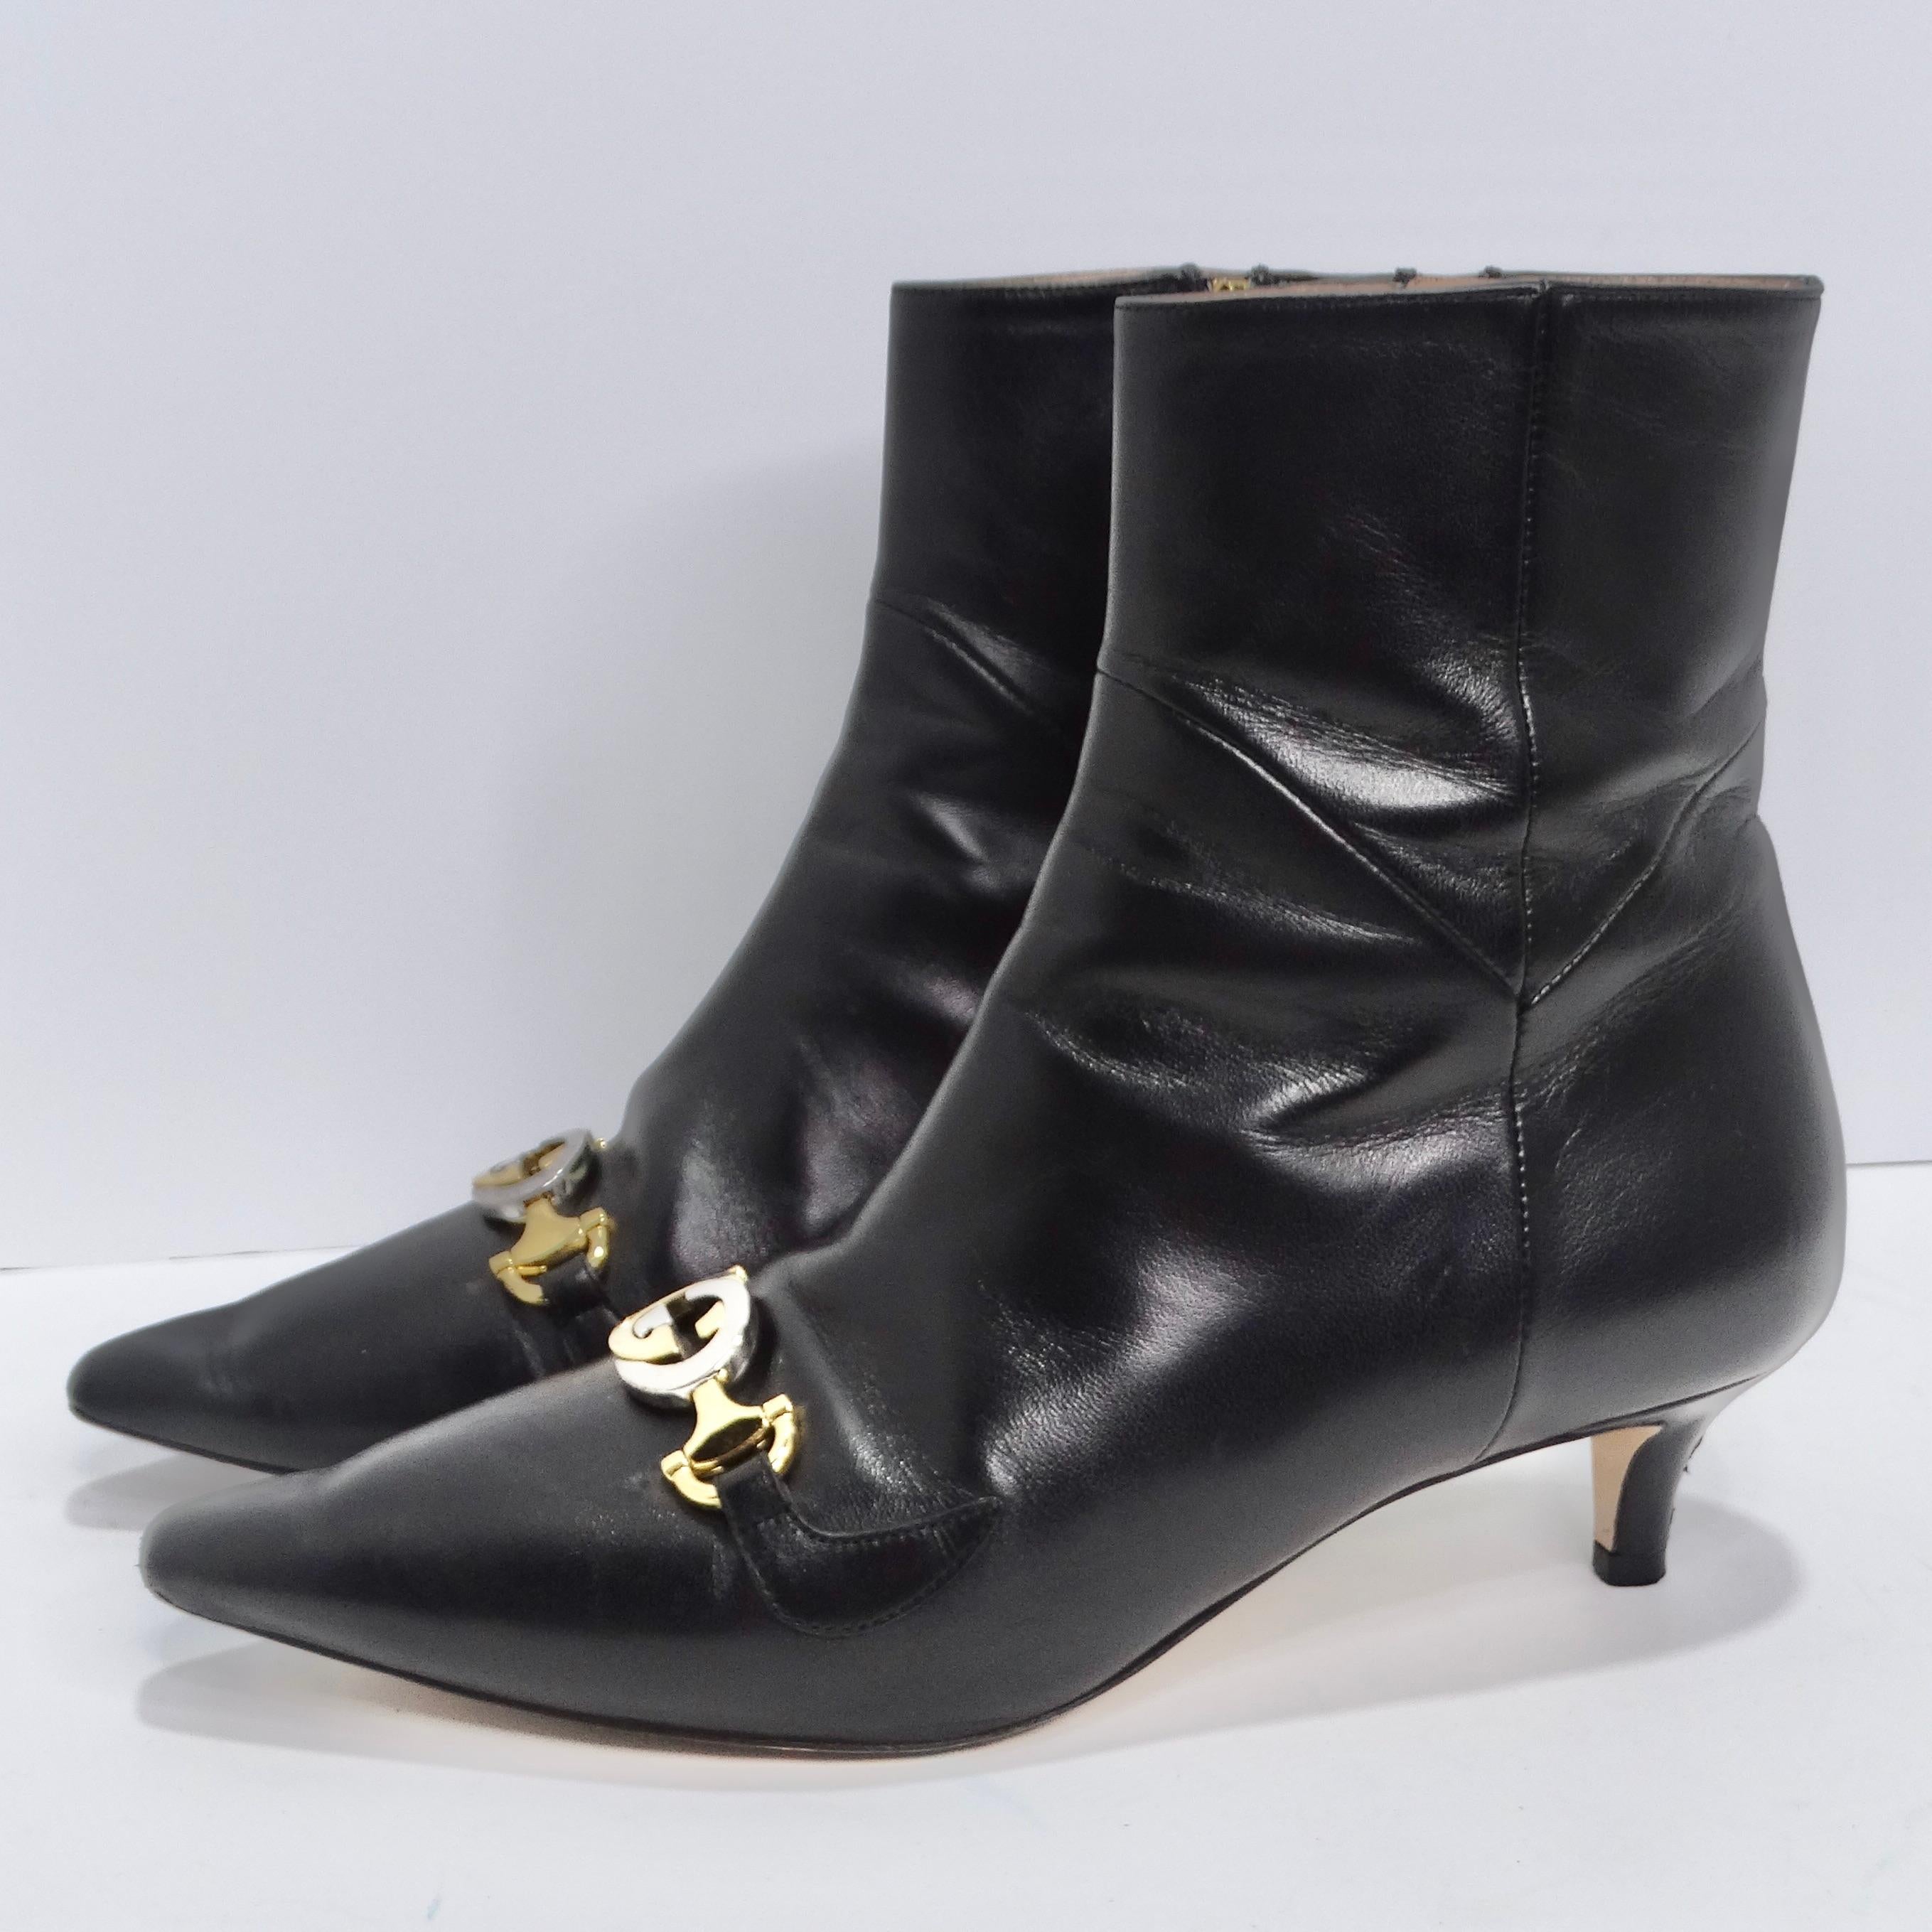 Gucci Leather Zumi Kitten Heel Ankle Boots 3